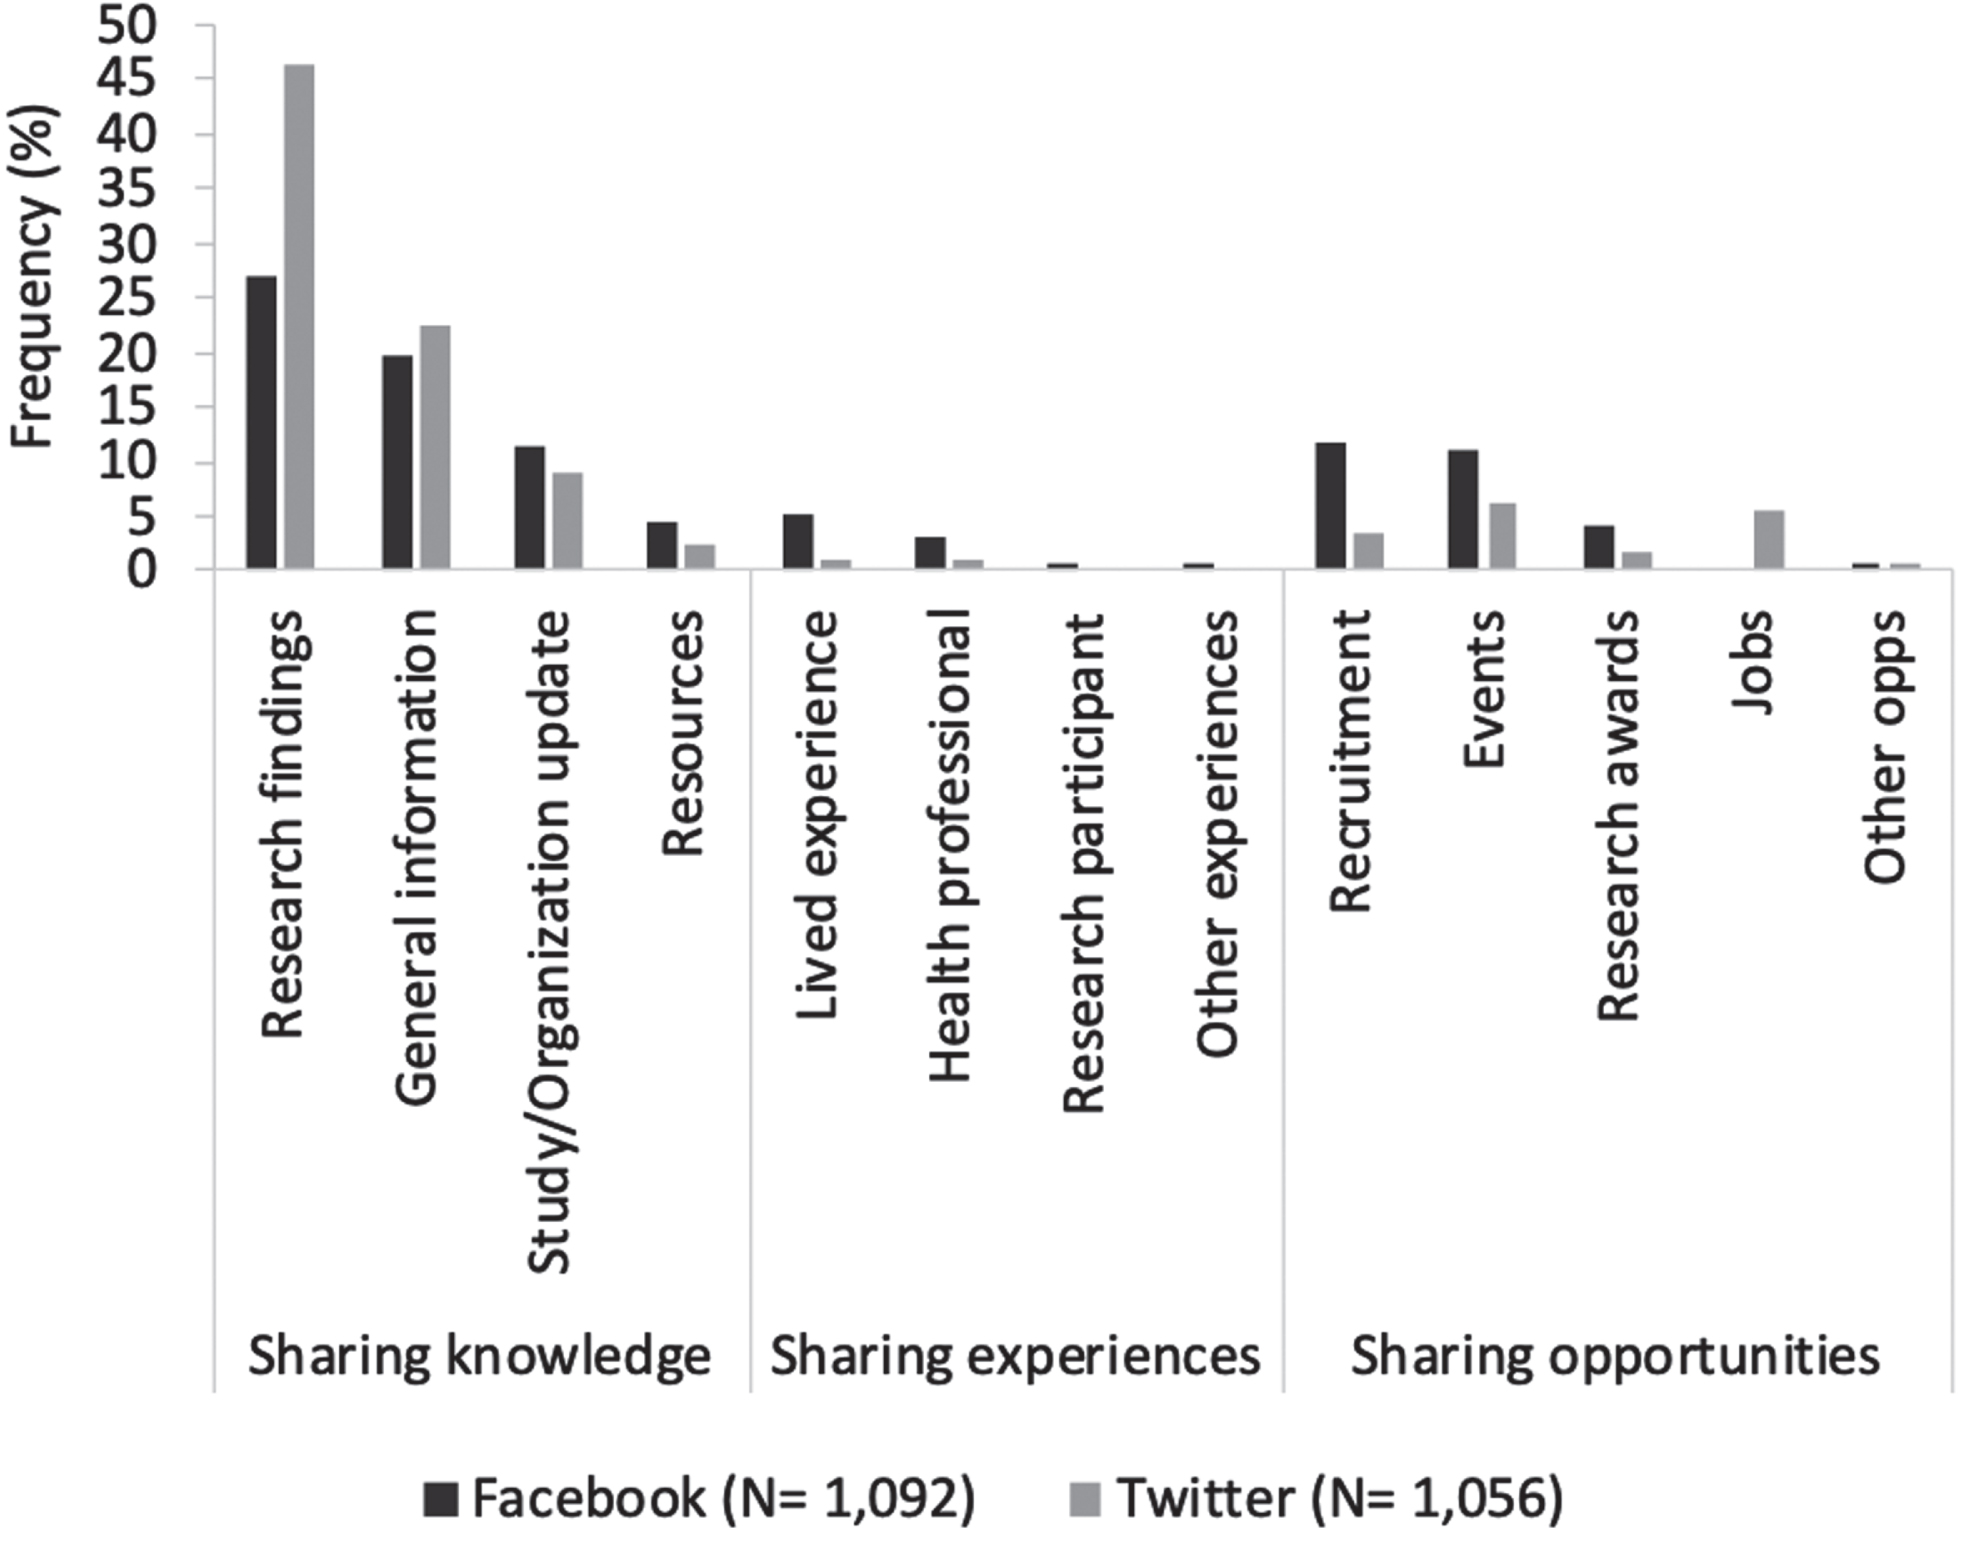 Purpose of dementia research posts. Percentage of Facebook and Twitter dementia research content by post type. Percentages for each post type are of a total of the N codes indicated for each platform.